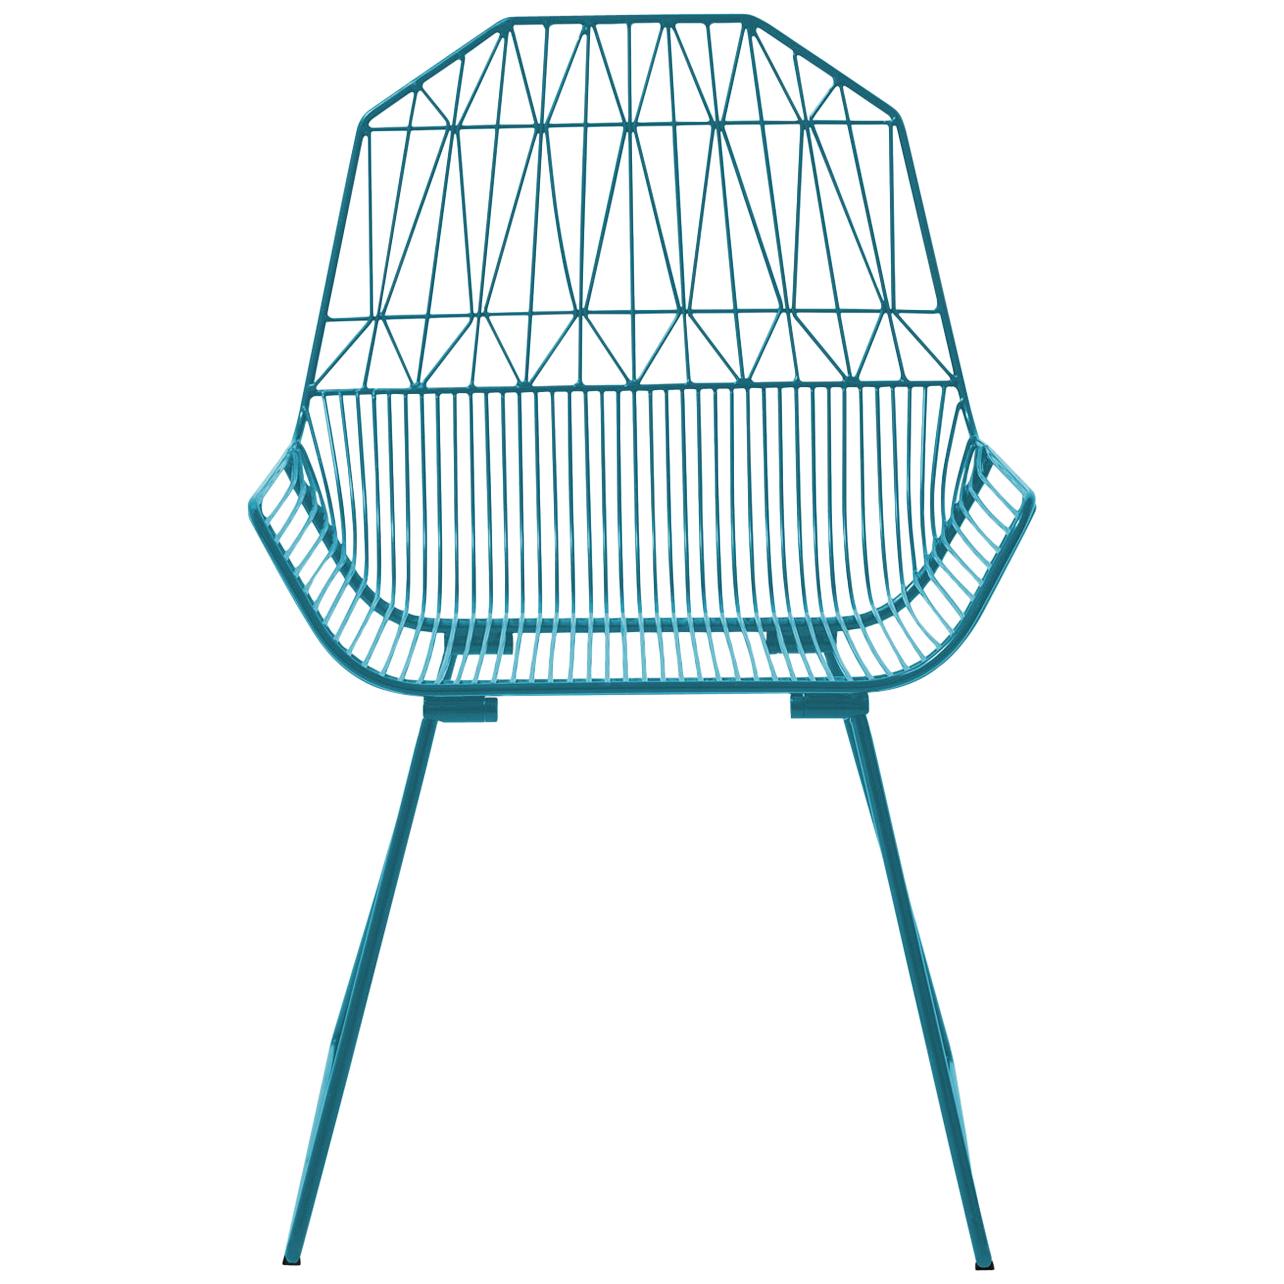 Modern, Midcentury Inspired Wire Lounge Chair, the Farmhouse in Peacock Blue